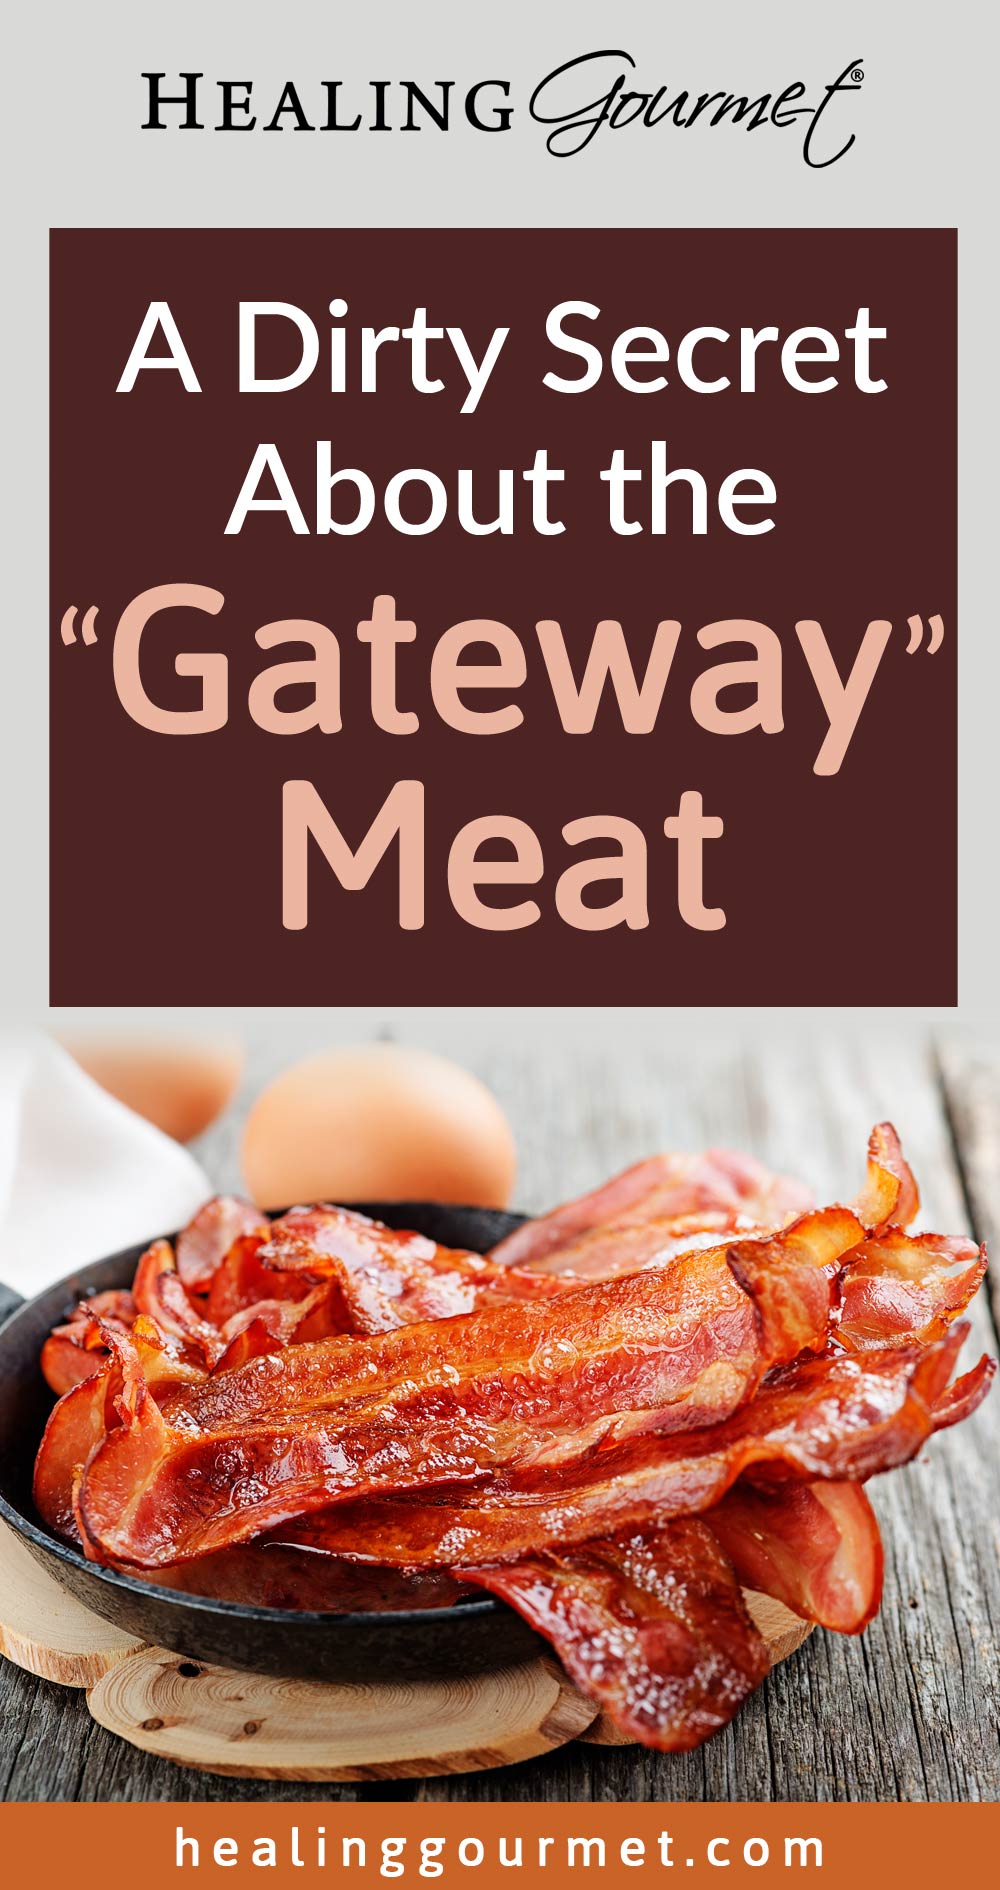 A Dirty Secret about the “Gateway” Meat